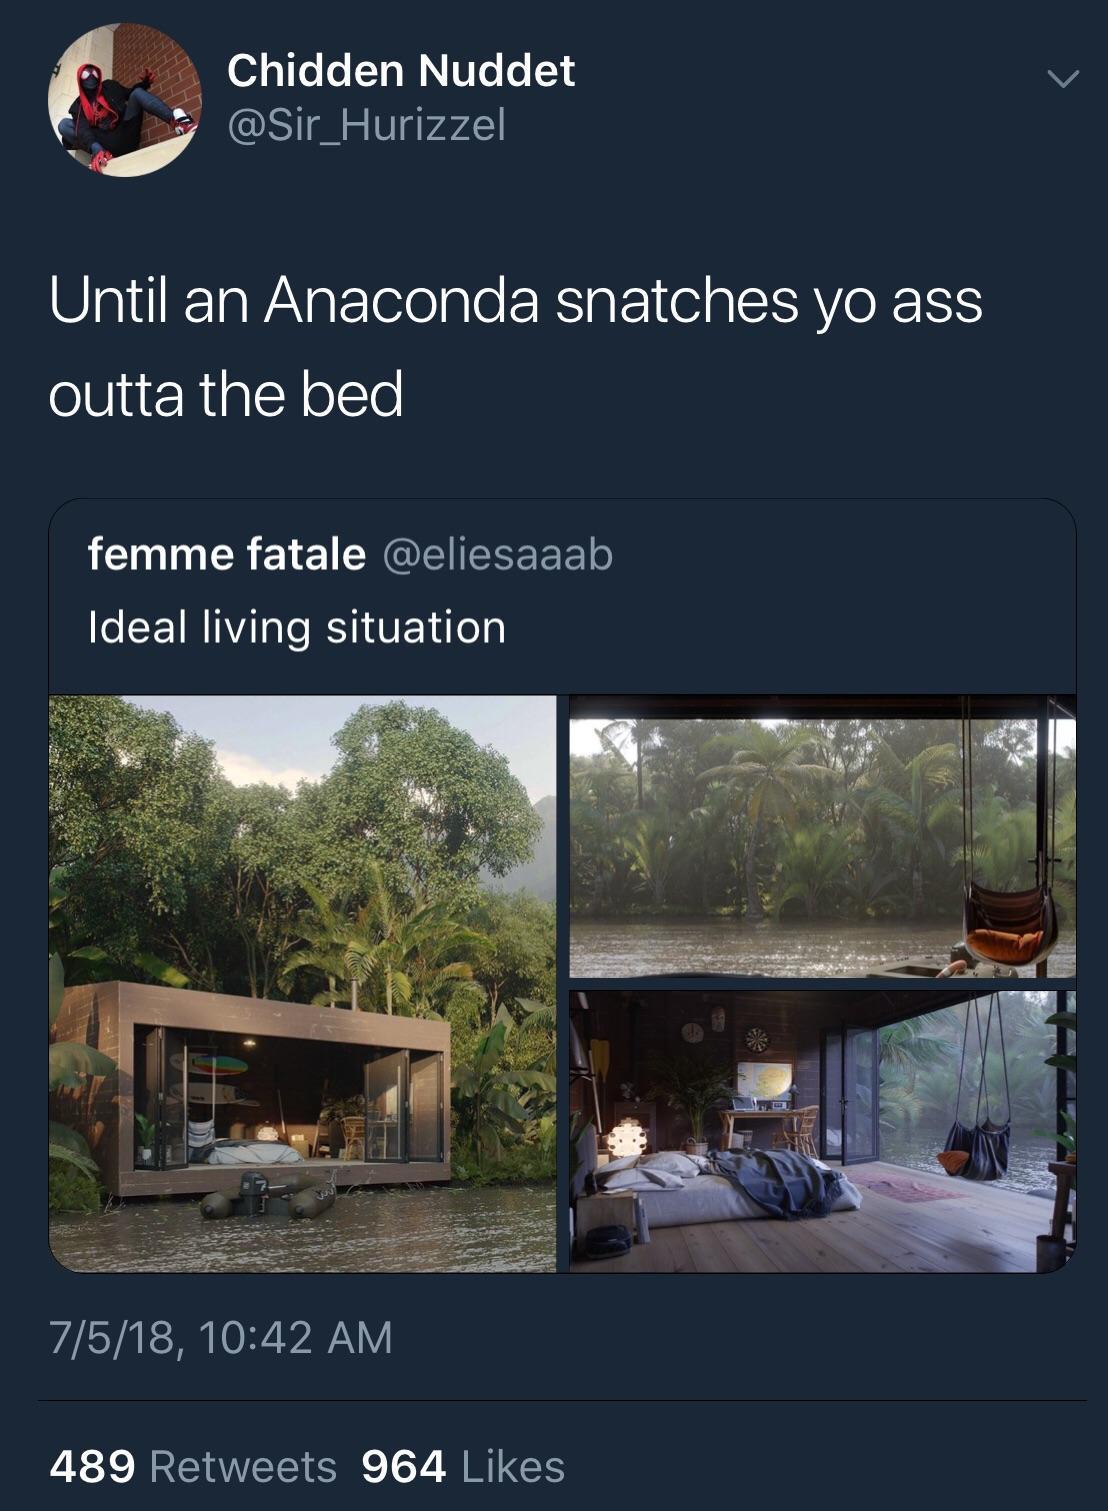 pic -ideal living situation - Chidden Nuddet Until an Anaconda snatches yo ass outta the bed femme fatale Ideal living situation 7518, 489 964